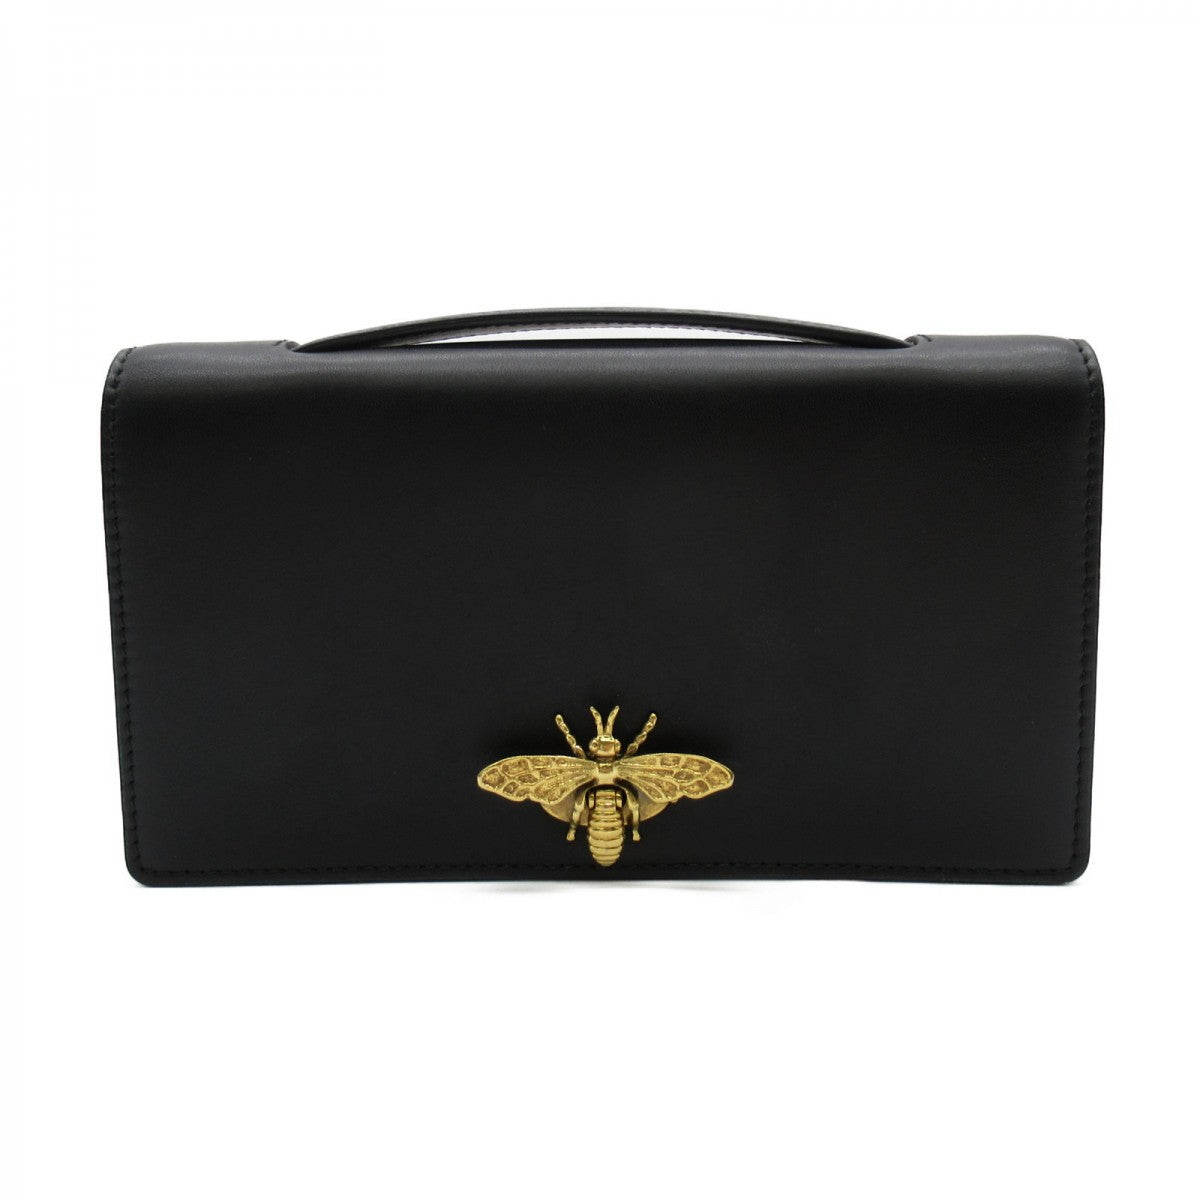 Leather Bee Clutch Bag